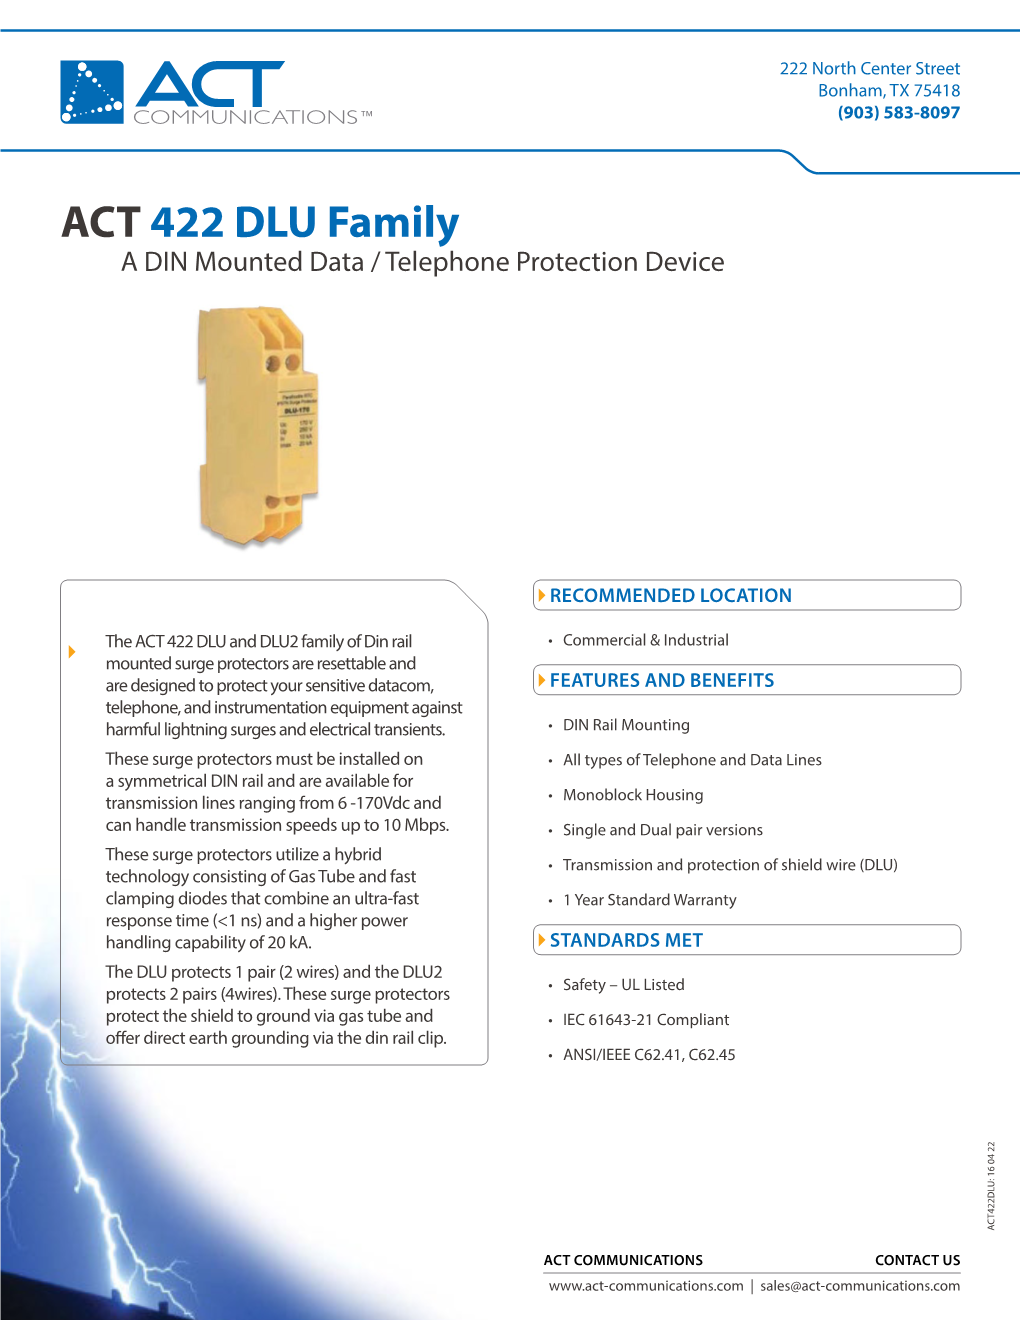 ACT 422 DLU Family a DIN Mounted Data / Telephone Protection Device